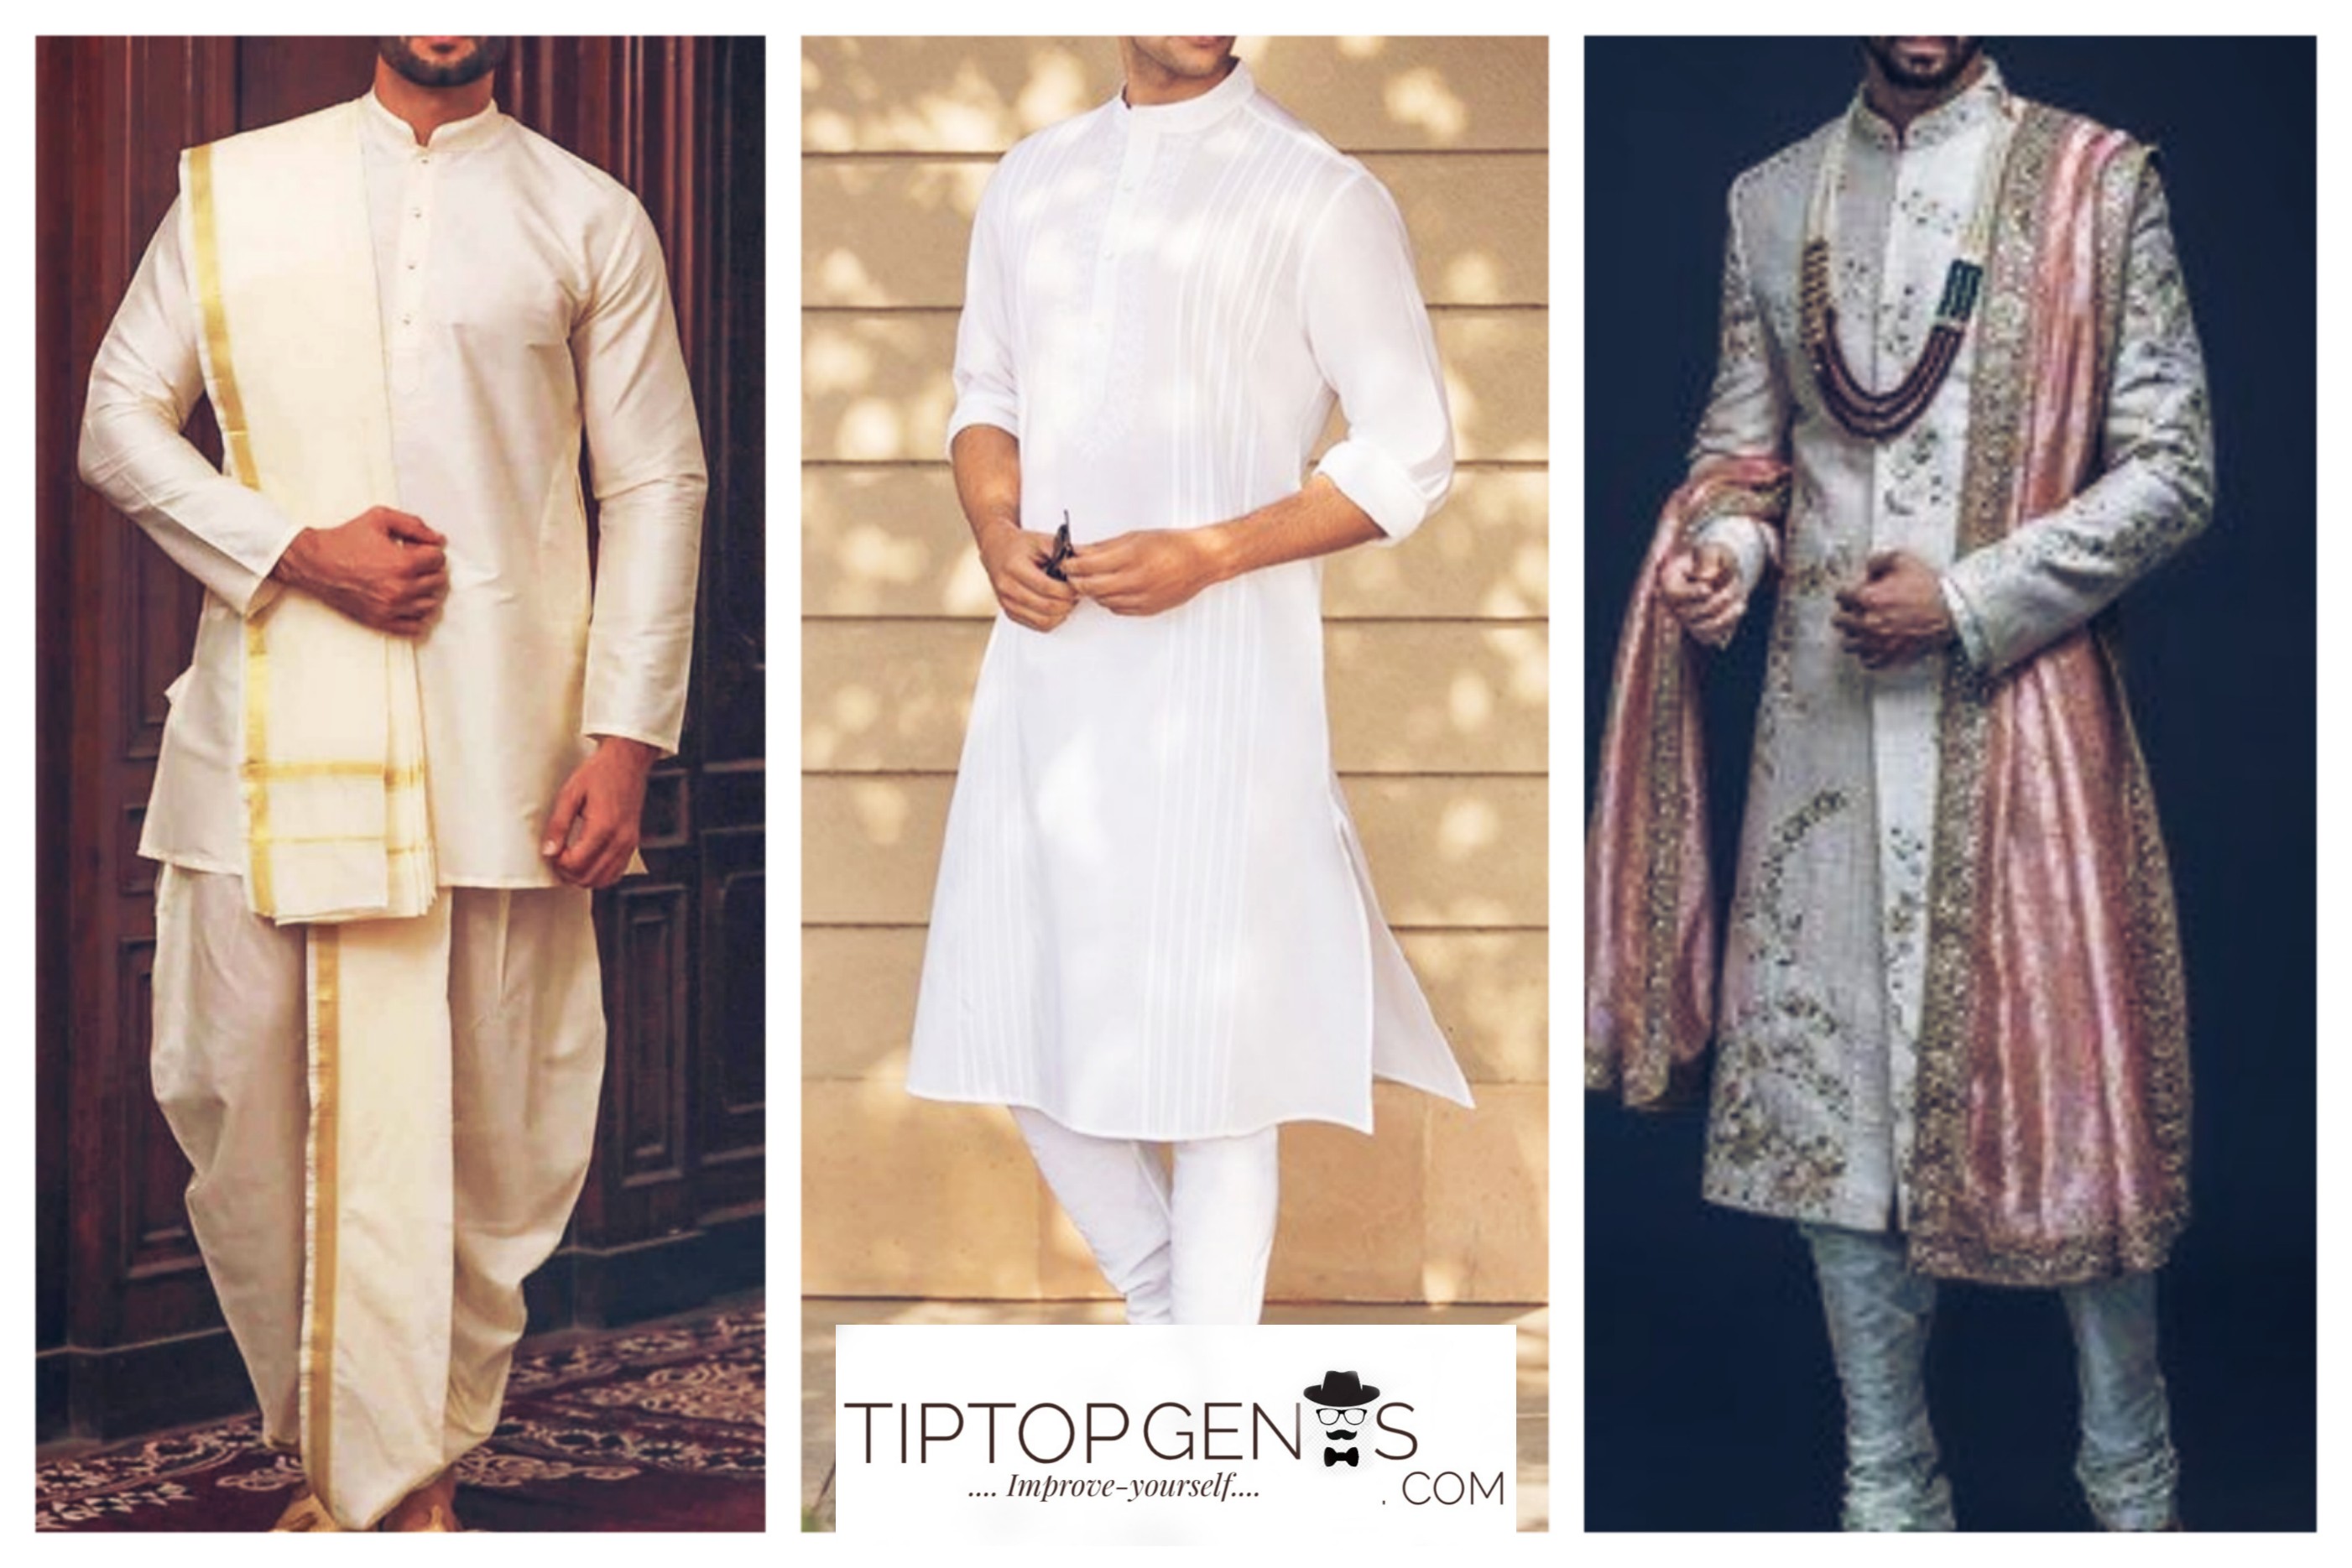 Three different traditional wears, worn by Indian men.